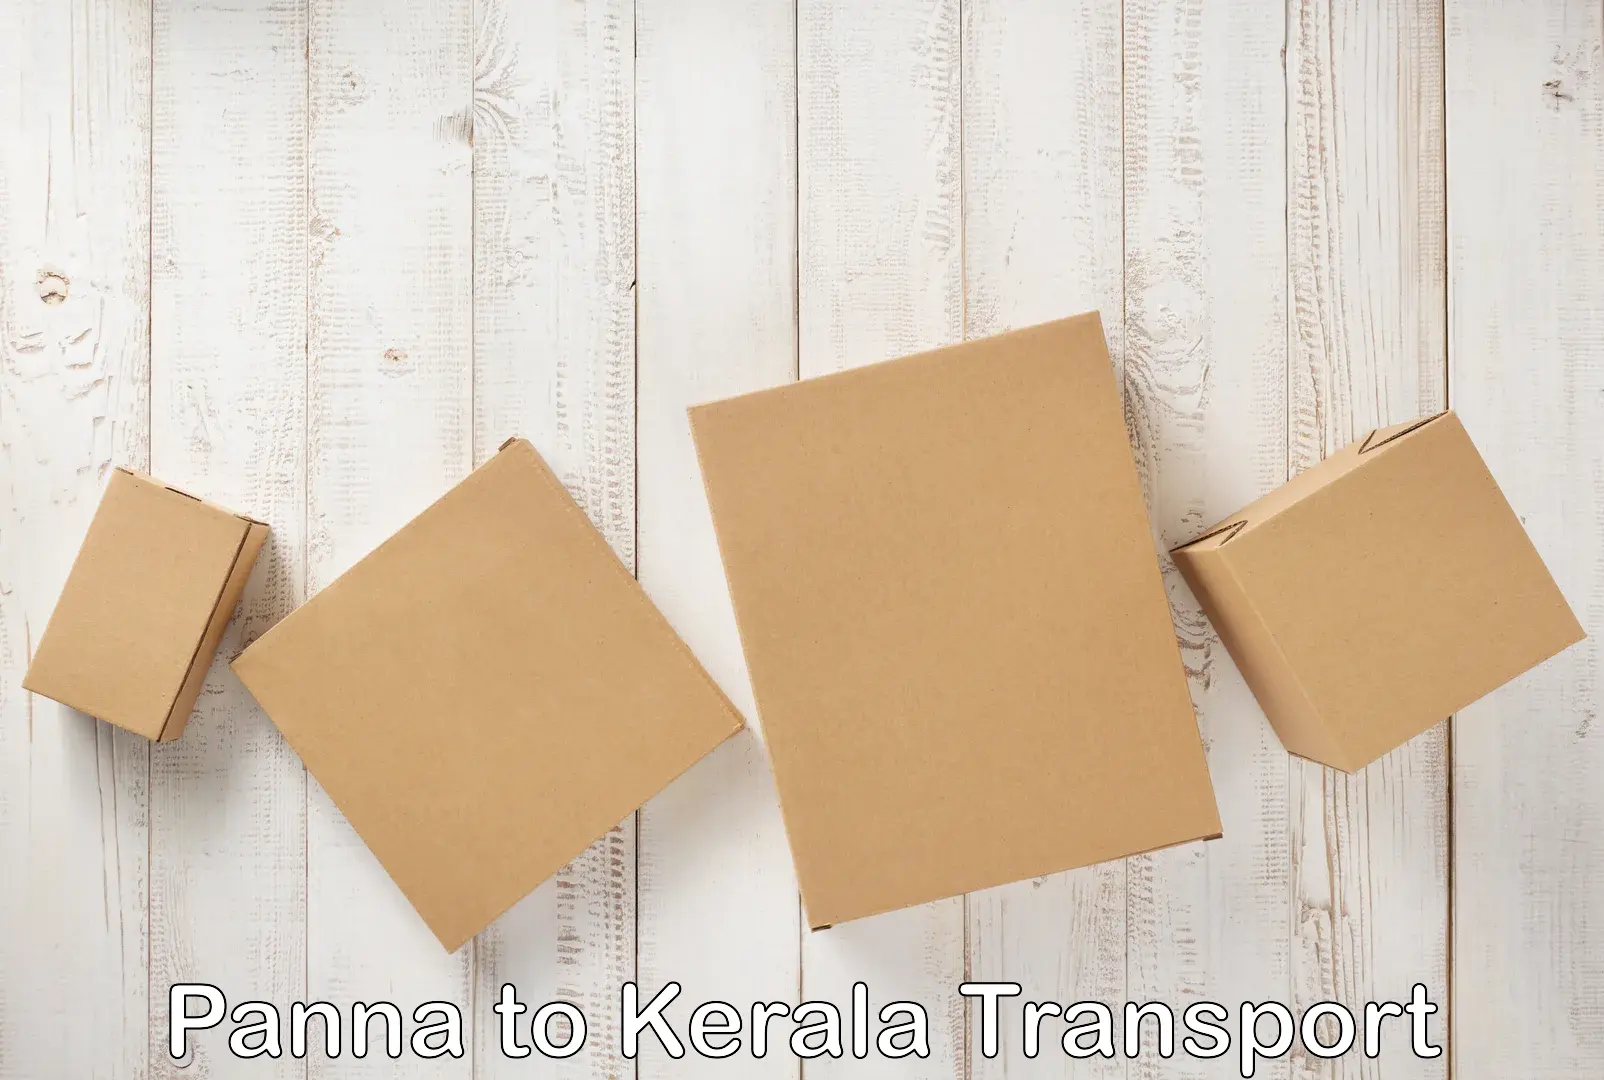 Delivery service Panna to Kerala